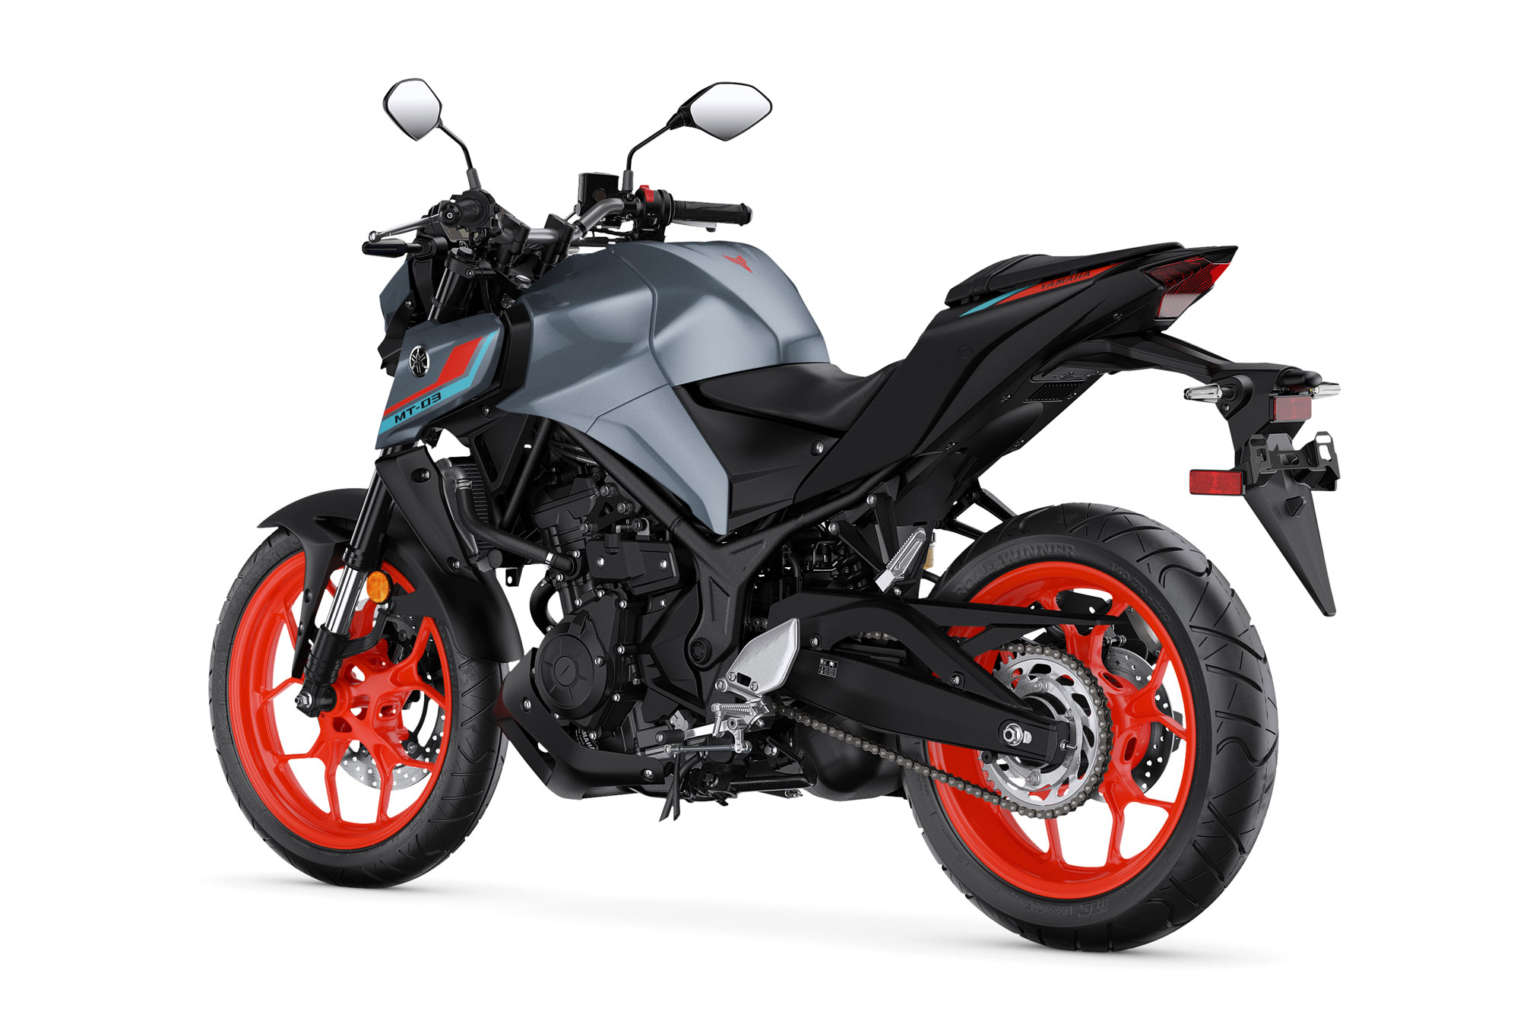 2021 Yamaha MT-03 Guide • Total Motorcycle